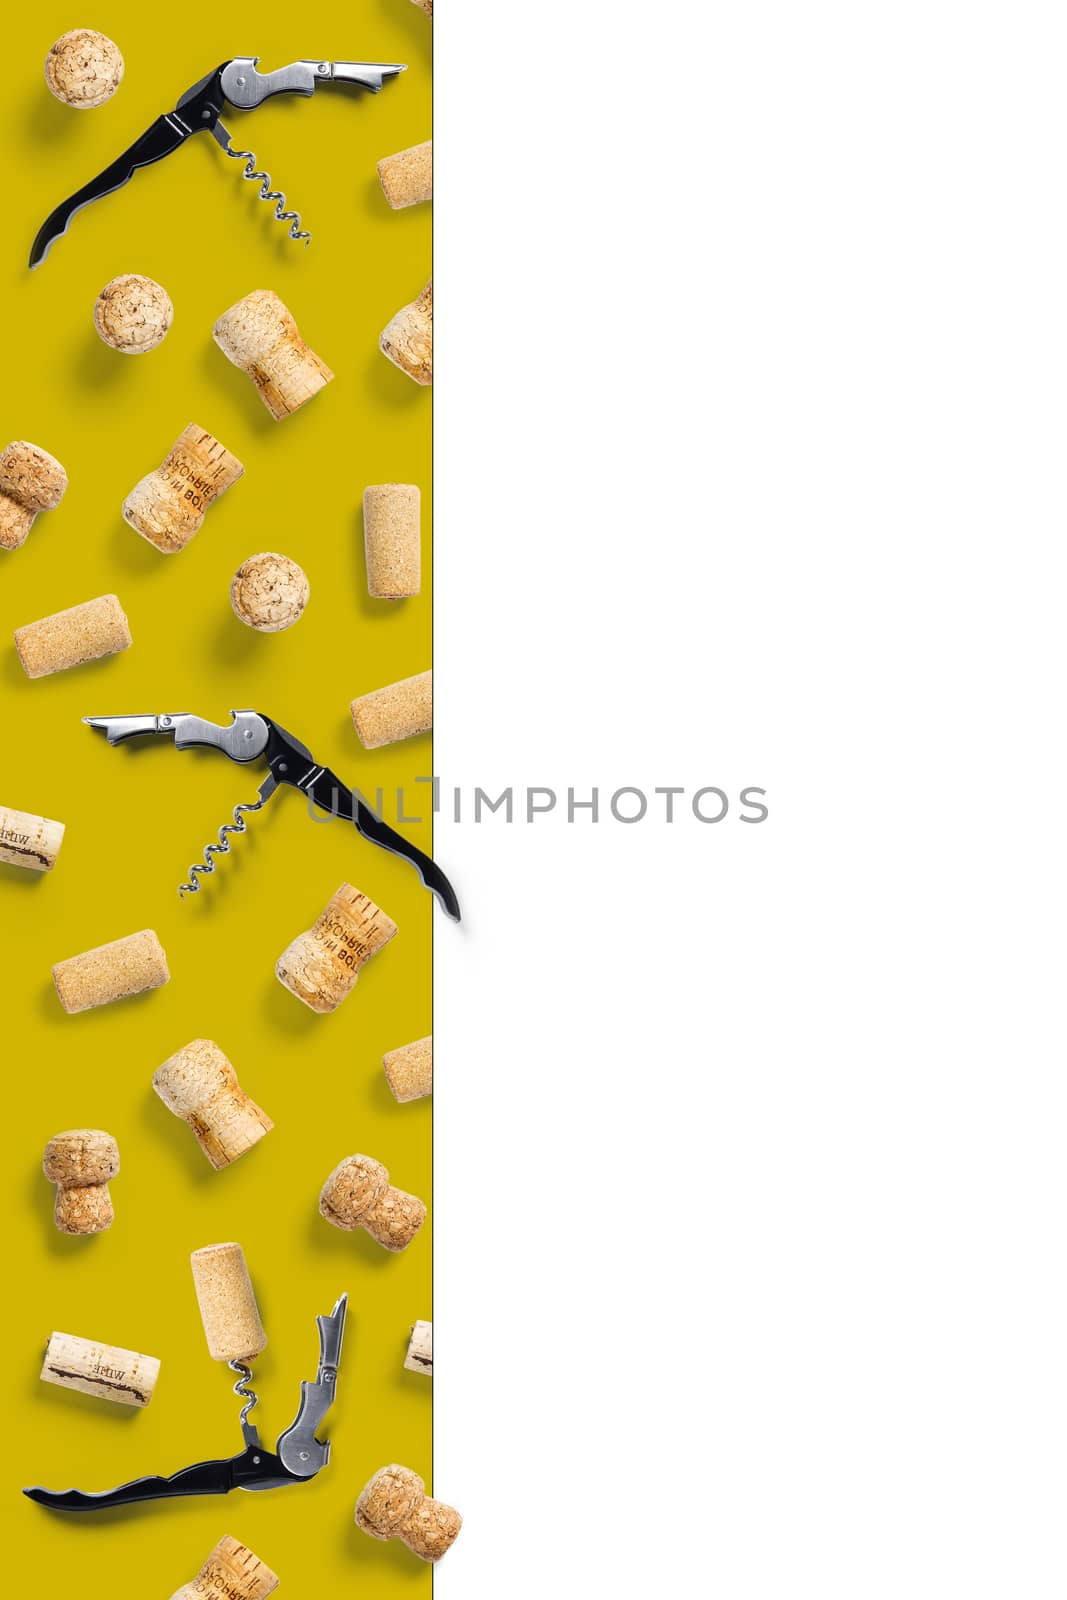 wine corks creative flat lay layout on a white backlit background. flatlay creative wine set with corks and corkscrew for design concept. by PhotoTime